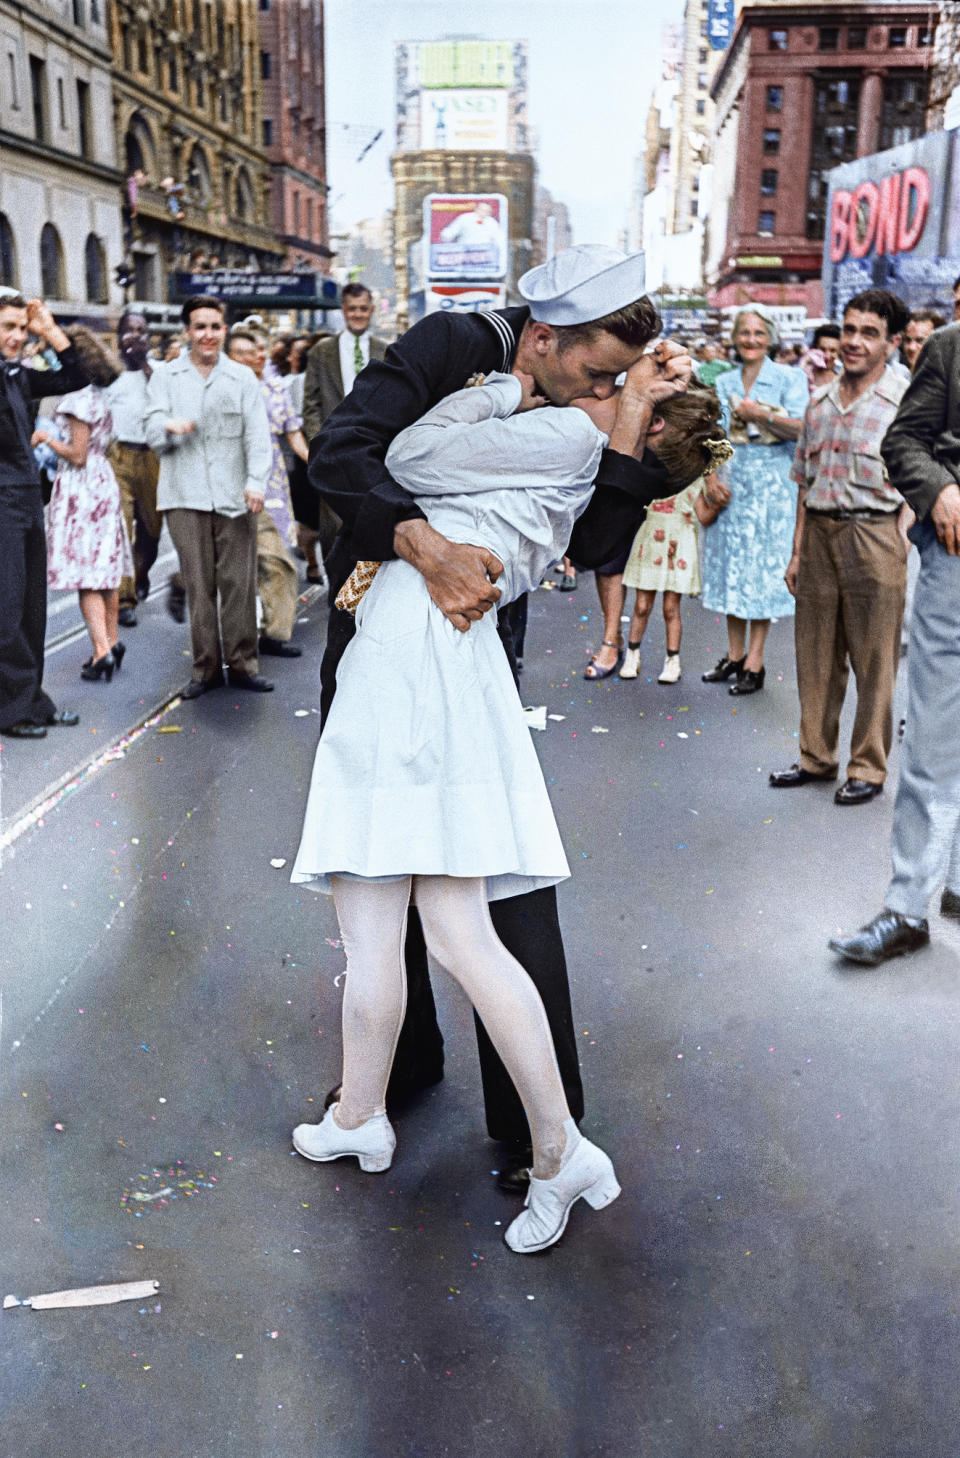 The Colour of Time: VJ Day in Times Square